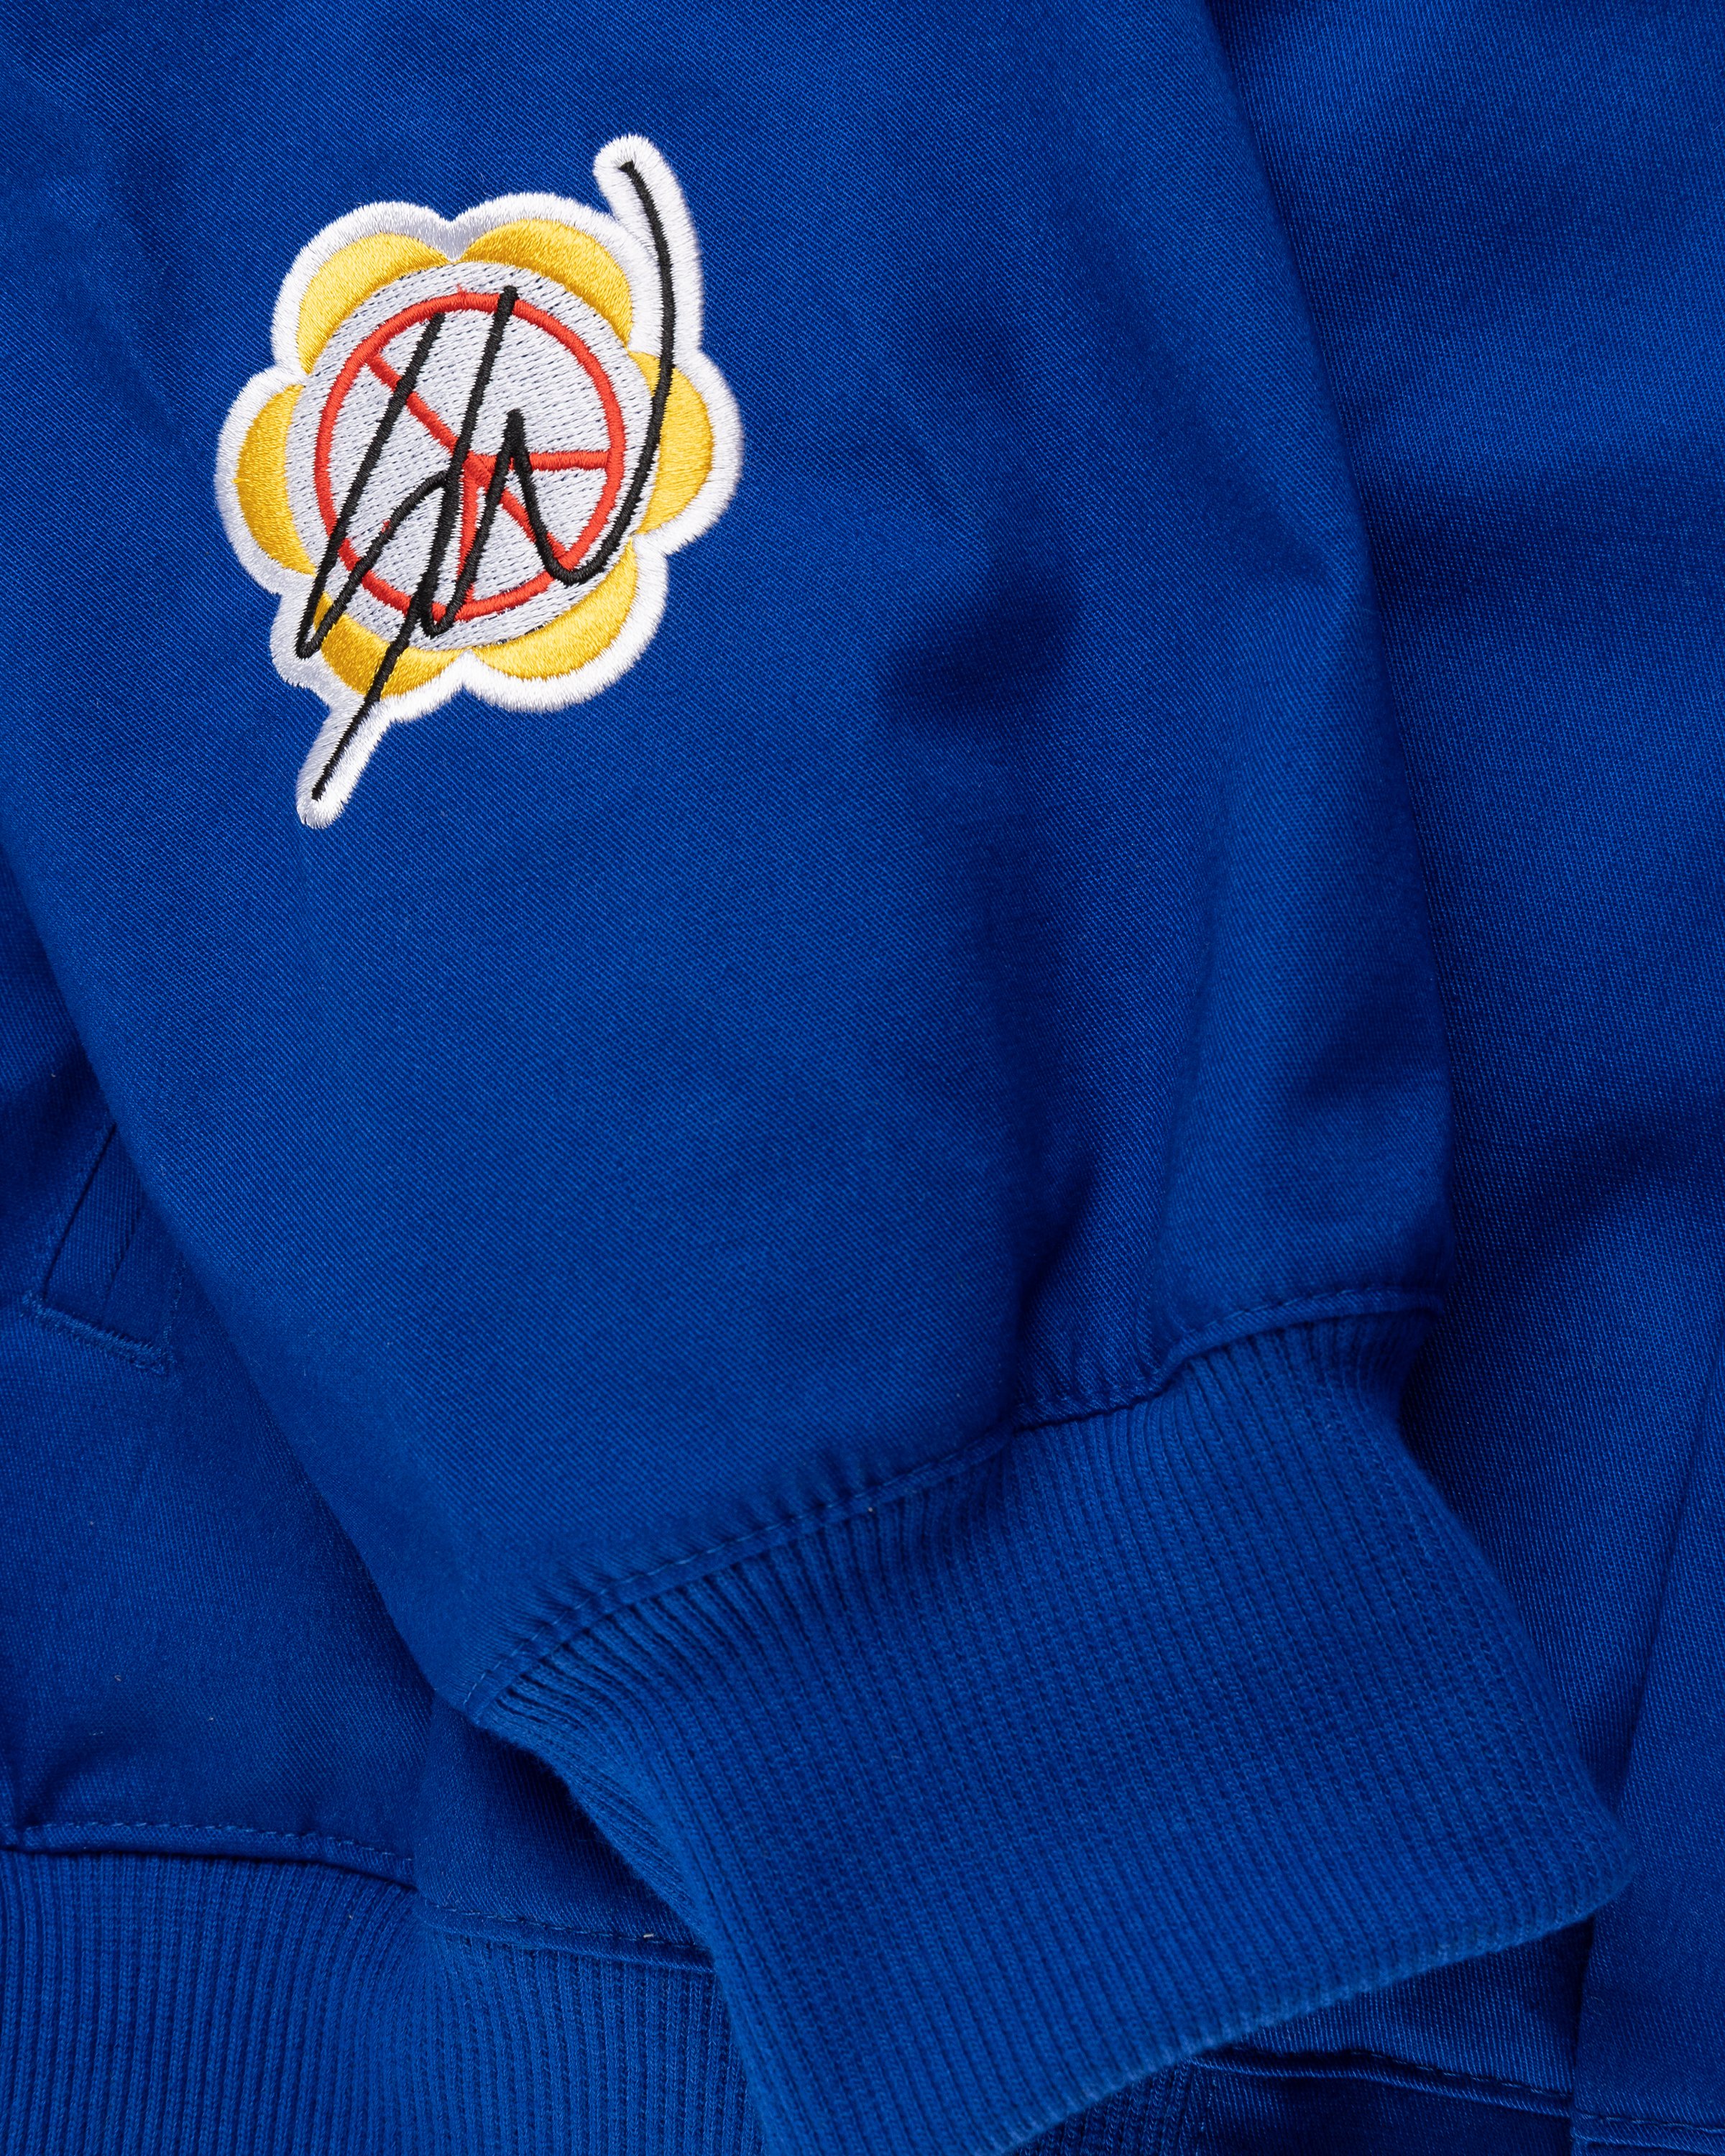 Adidas - Sean Wotherspoon x Hot Wheels Race Jacket Blue - Clothing - Blue - Image 4